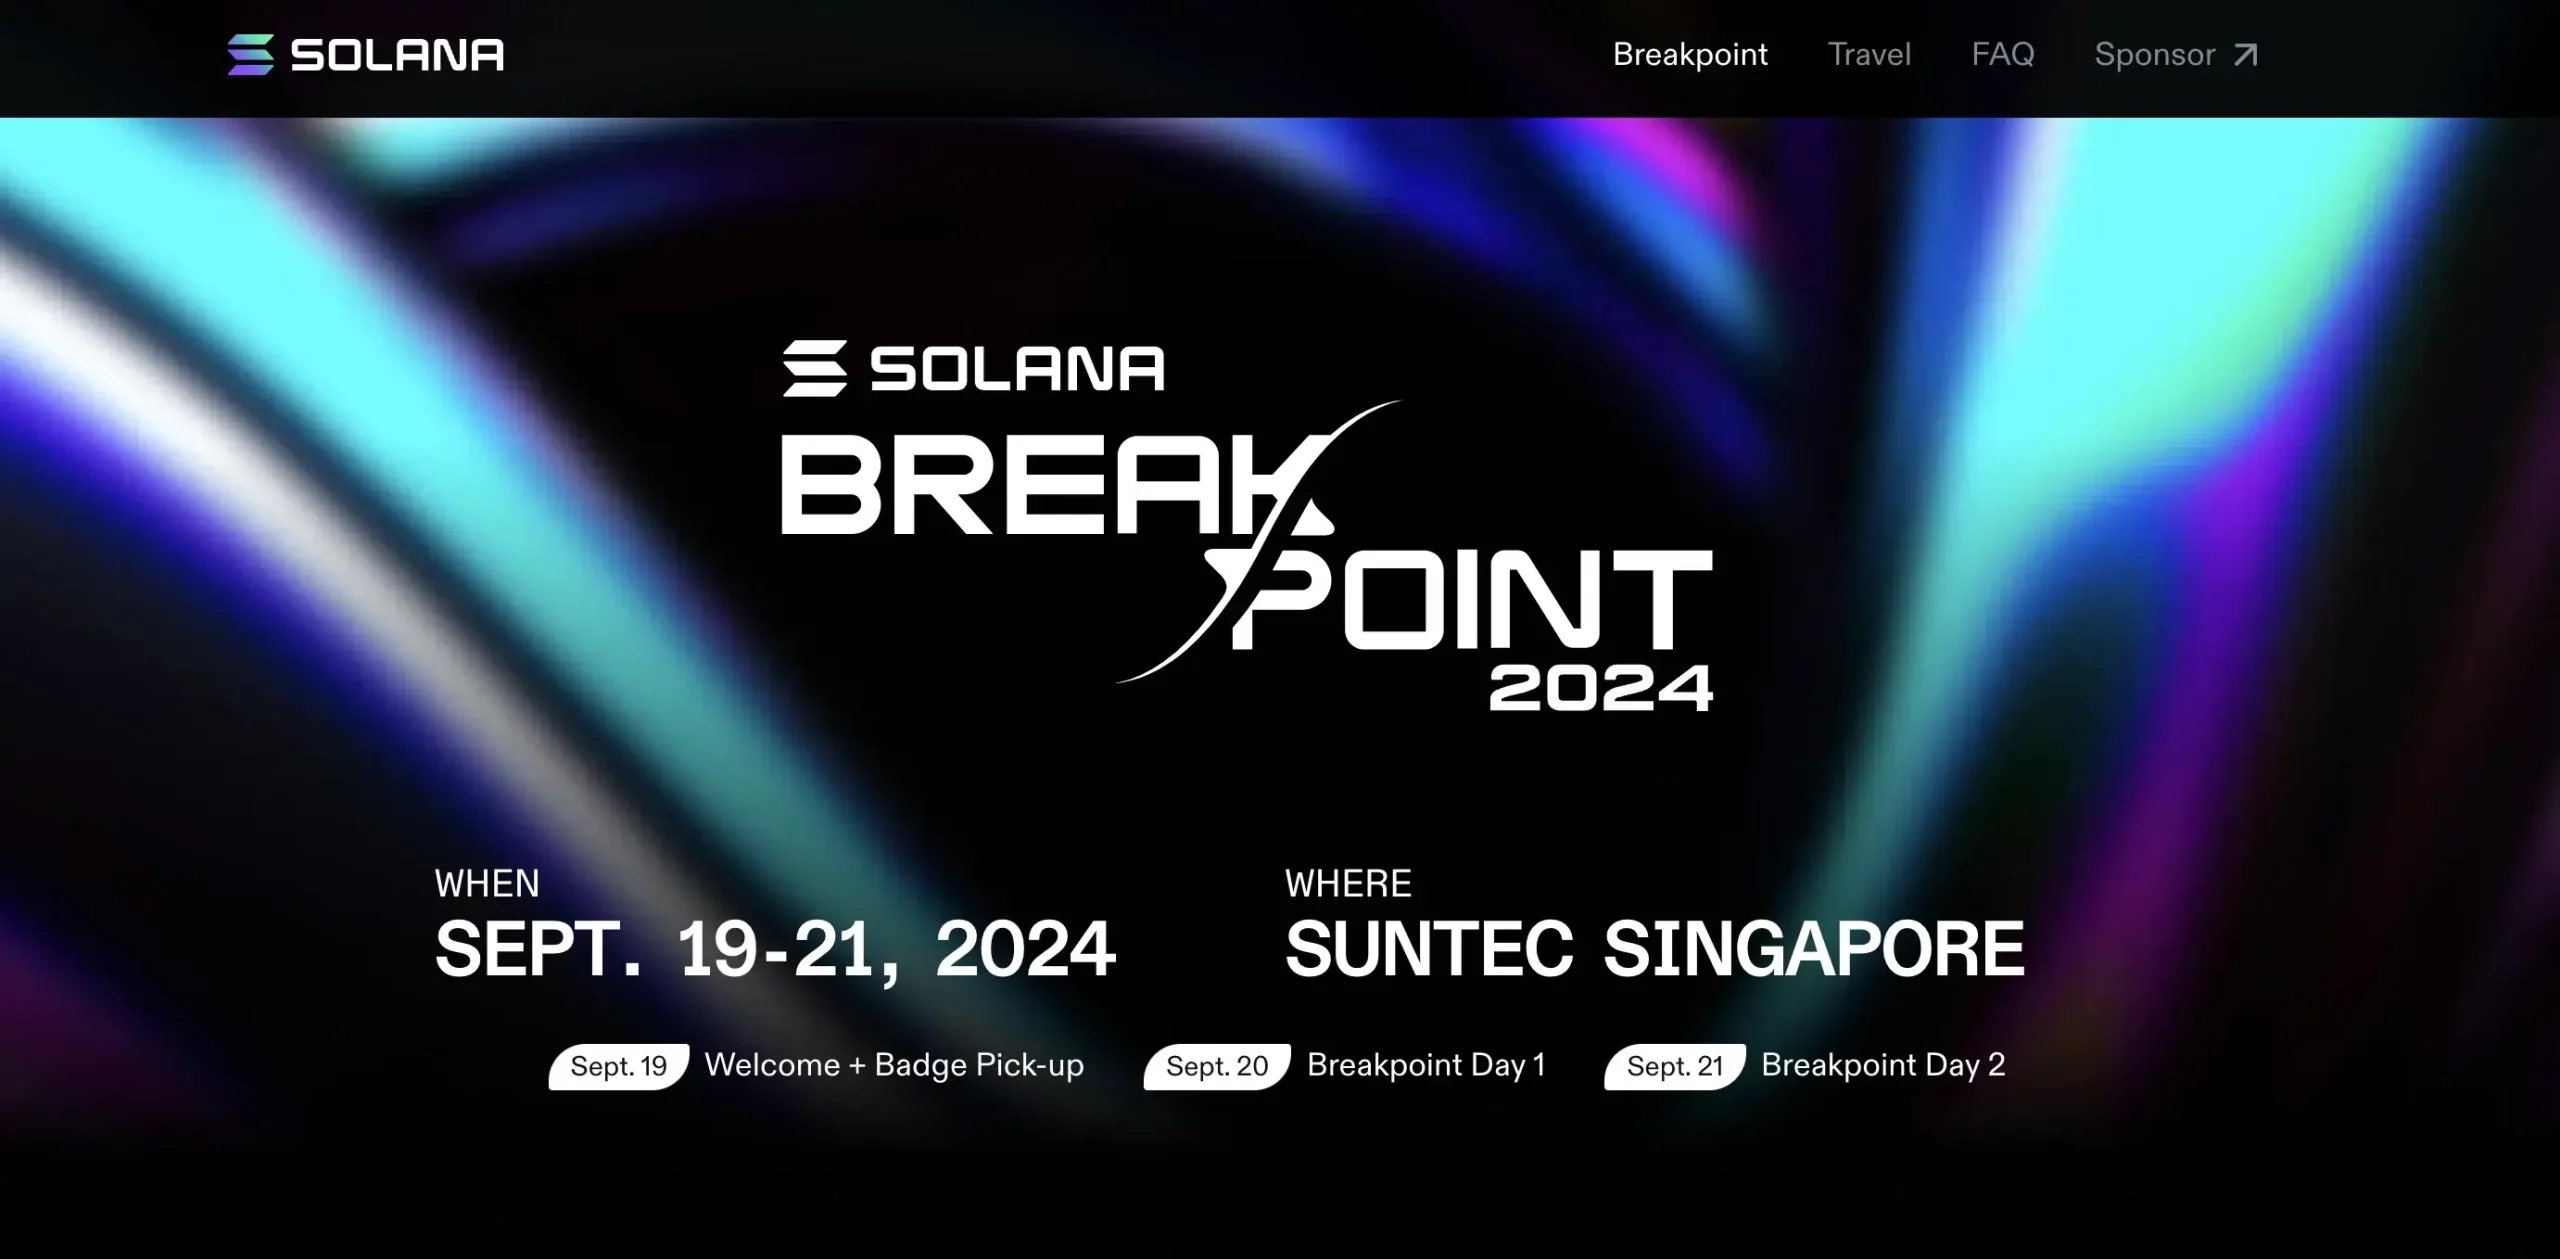 Solana Breakpoint 2024